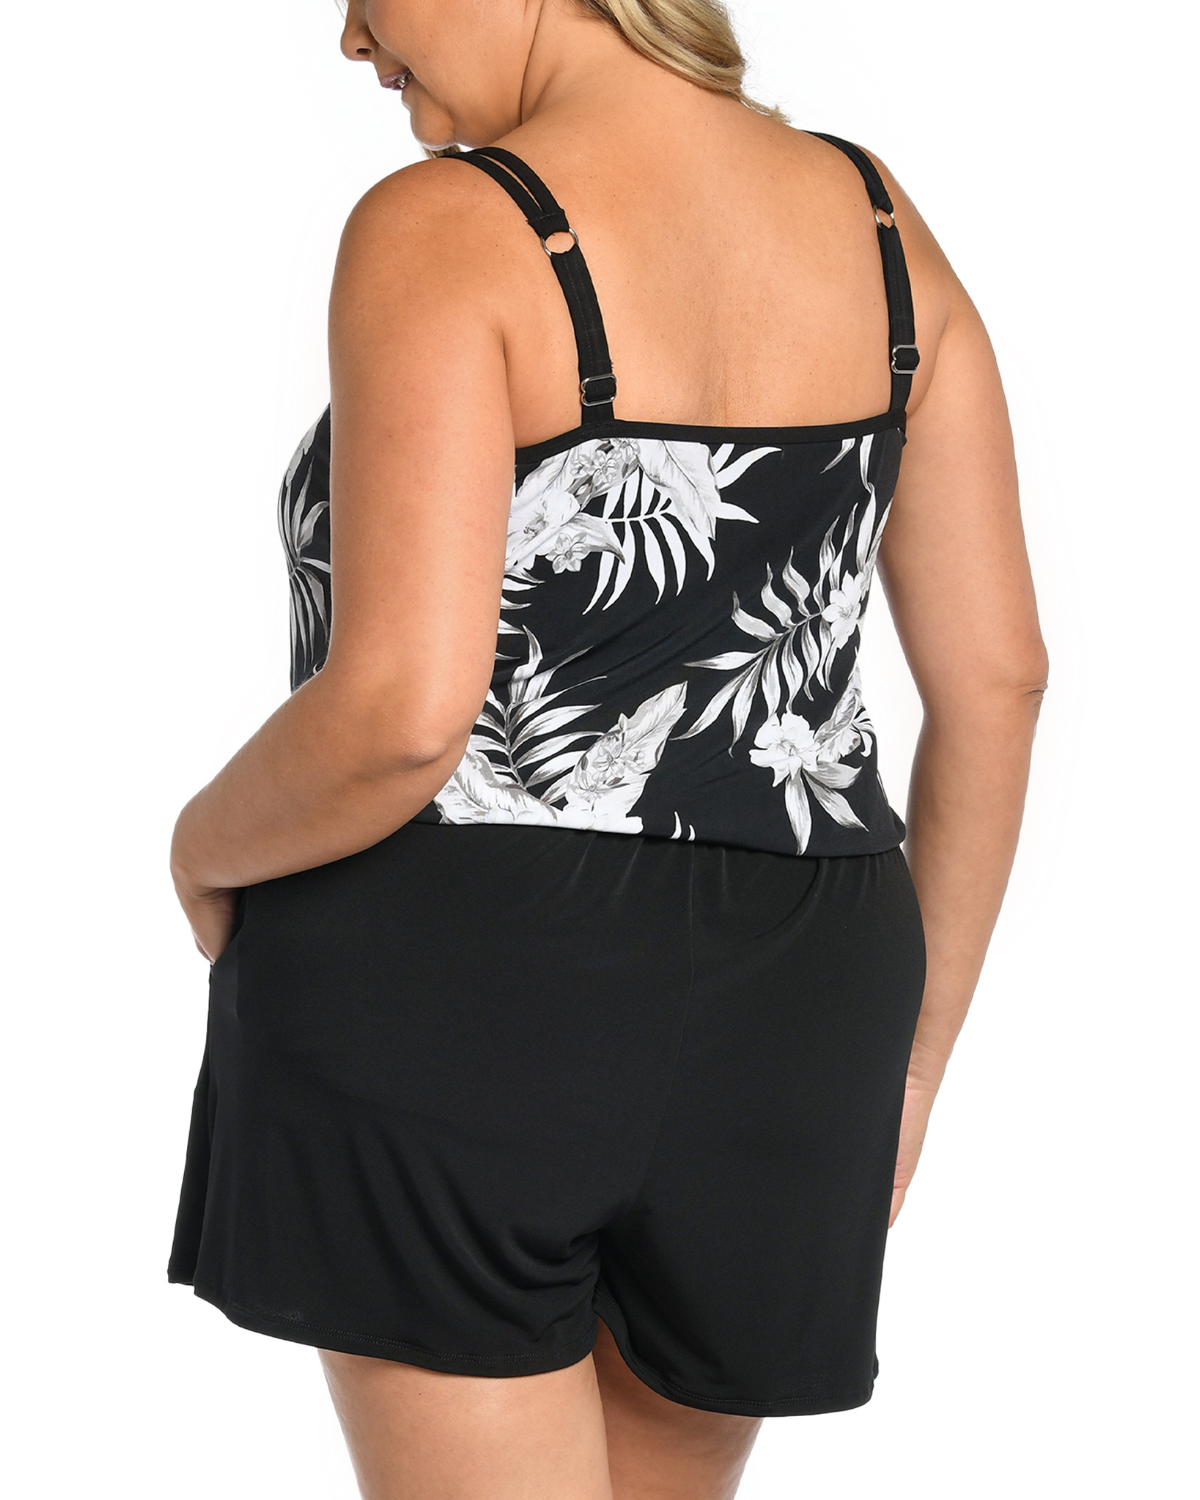 Plus size model wearing a swim romper with a a white and black floral print